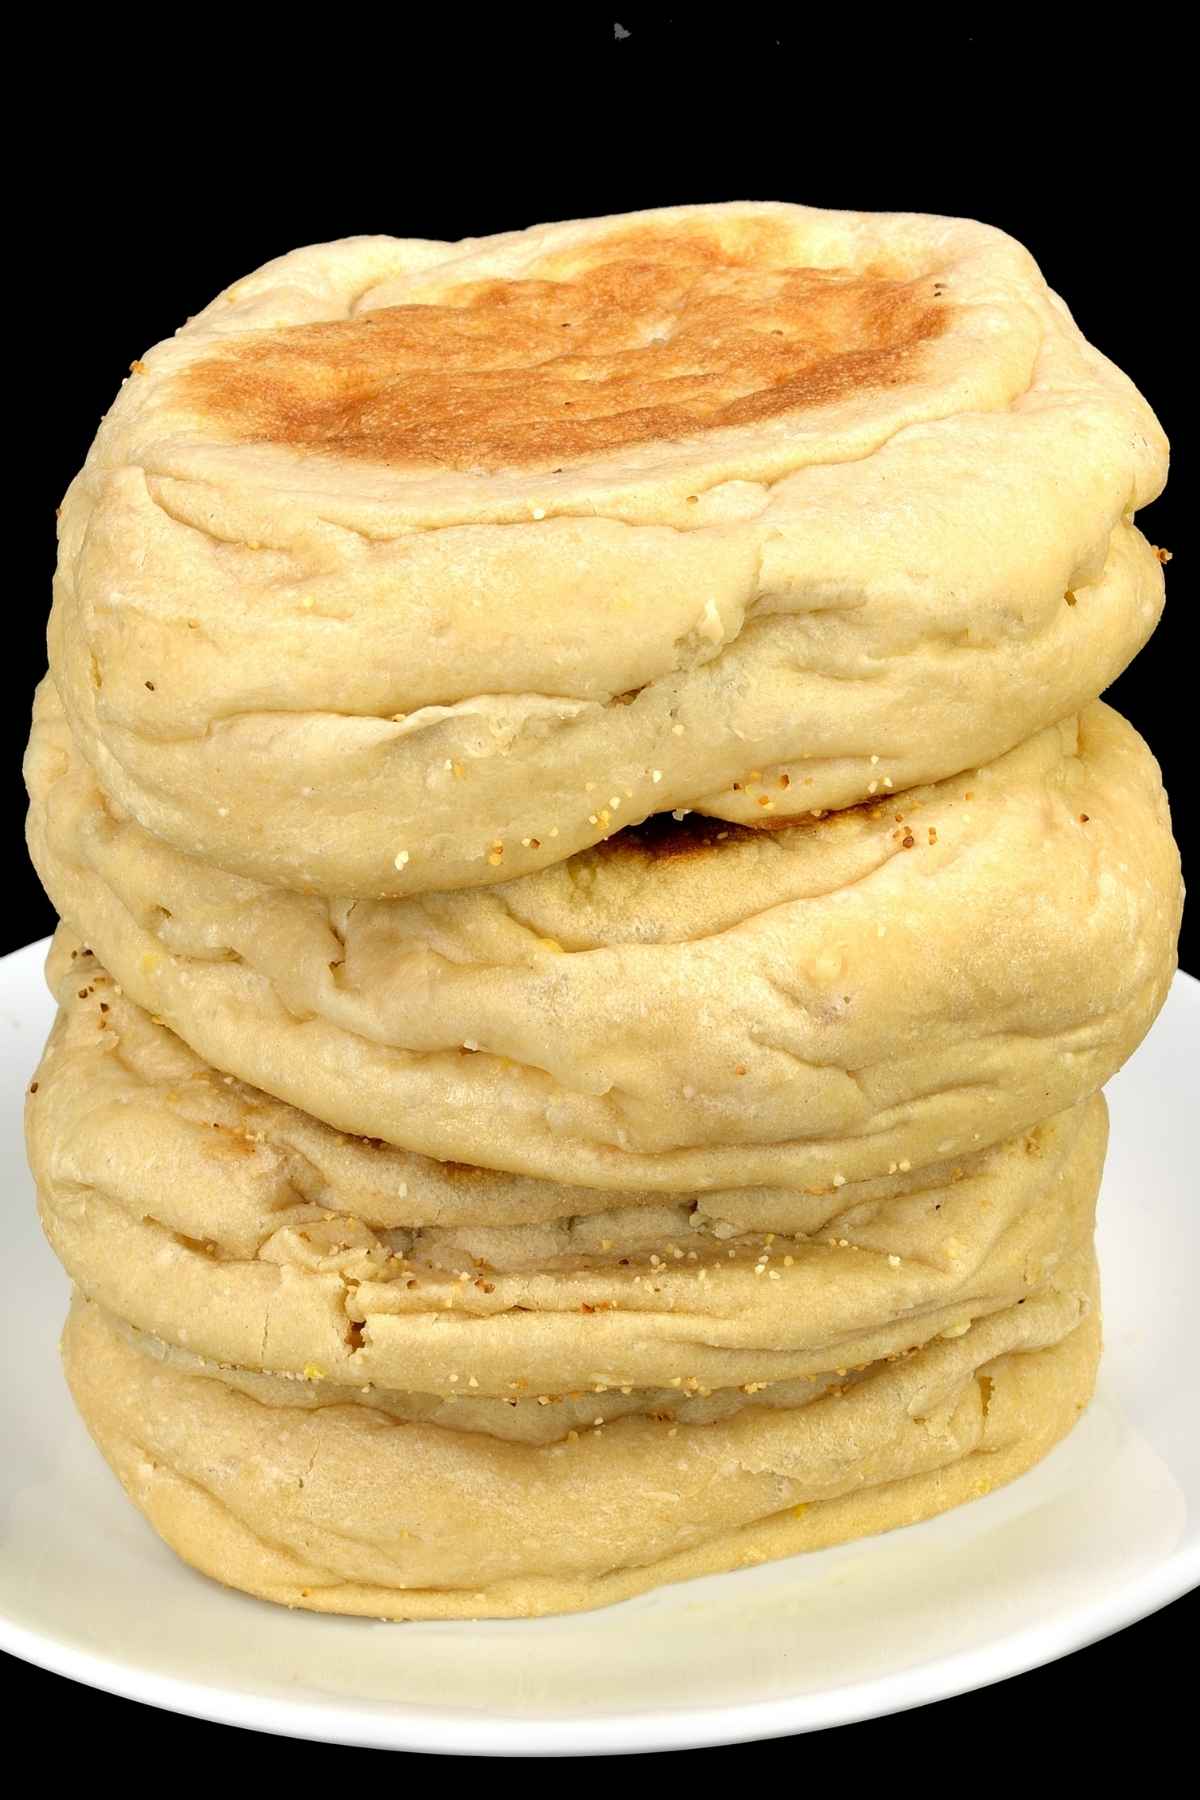 A stack of 3 English muffins on a white plate.